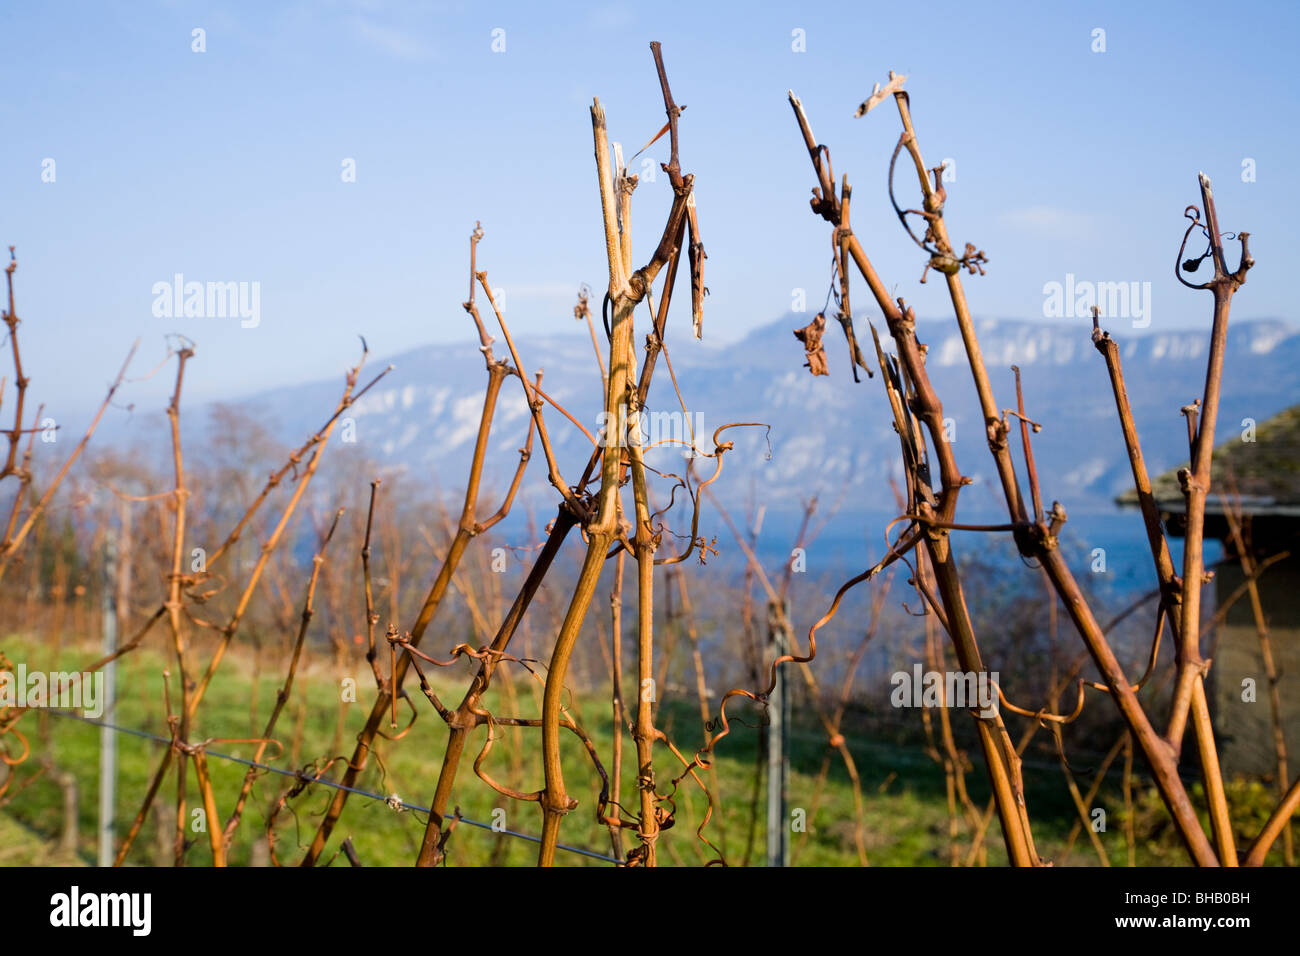 Budding branches / twigs / stems / bud / on an alpine vine in a French vineyard during winter. Alps are visible in the distance. Stock Photo